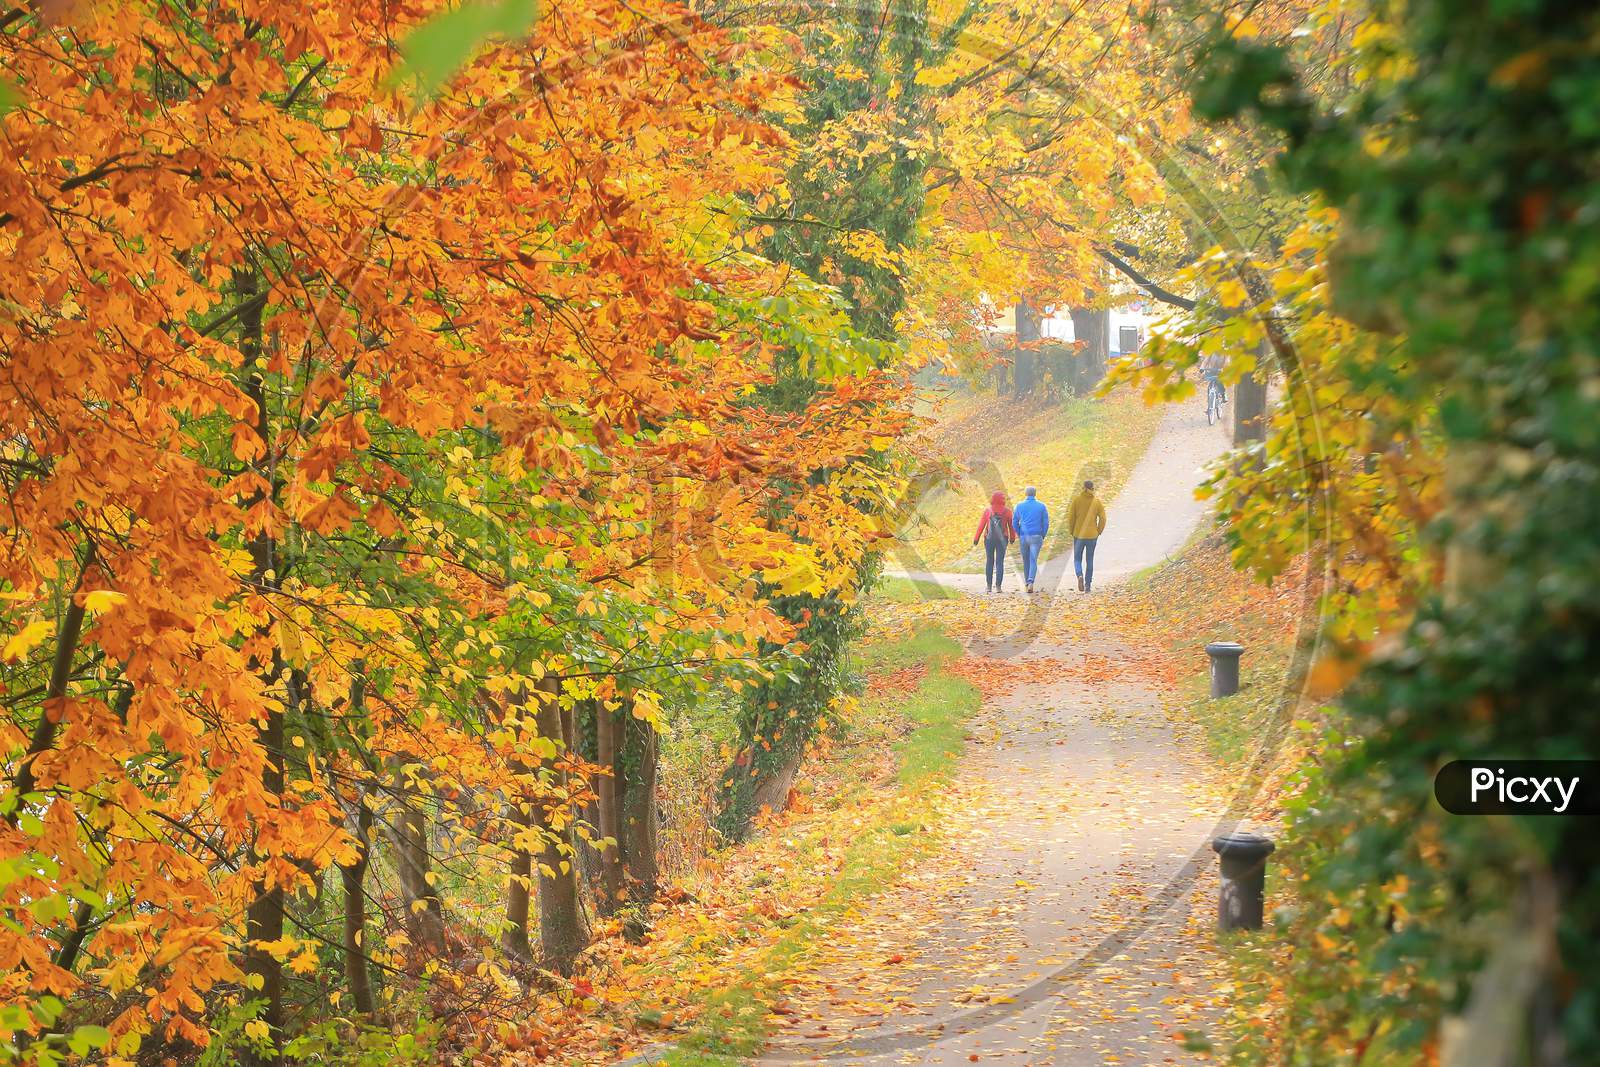 Regensburg, Germany: People Walking On The Street Along The Autumn Trees